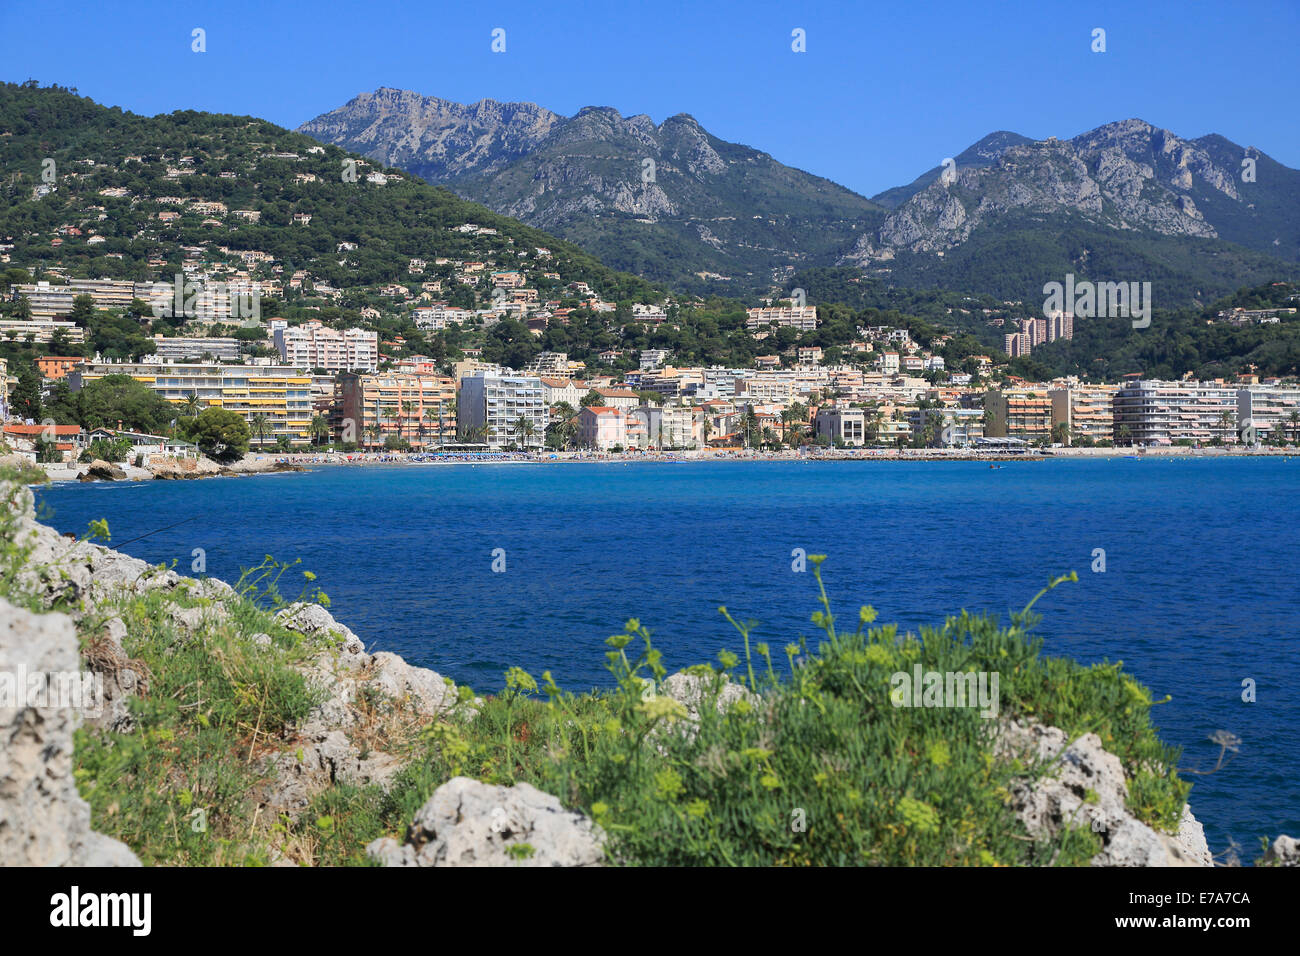 Beach of Carnolès, in front of the mountains of the Maritime Alps, Roquebrune Cap Martin, Provence Alpes Côte d'Azur, France Stock Photo